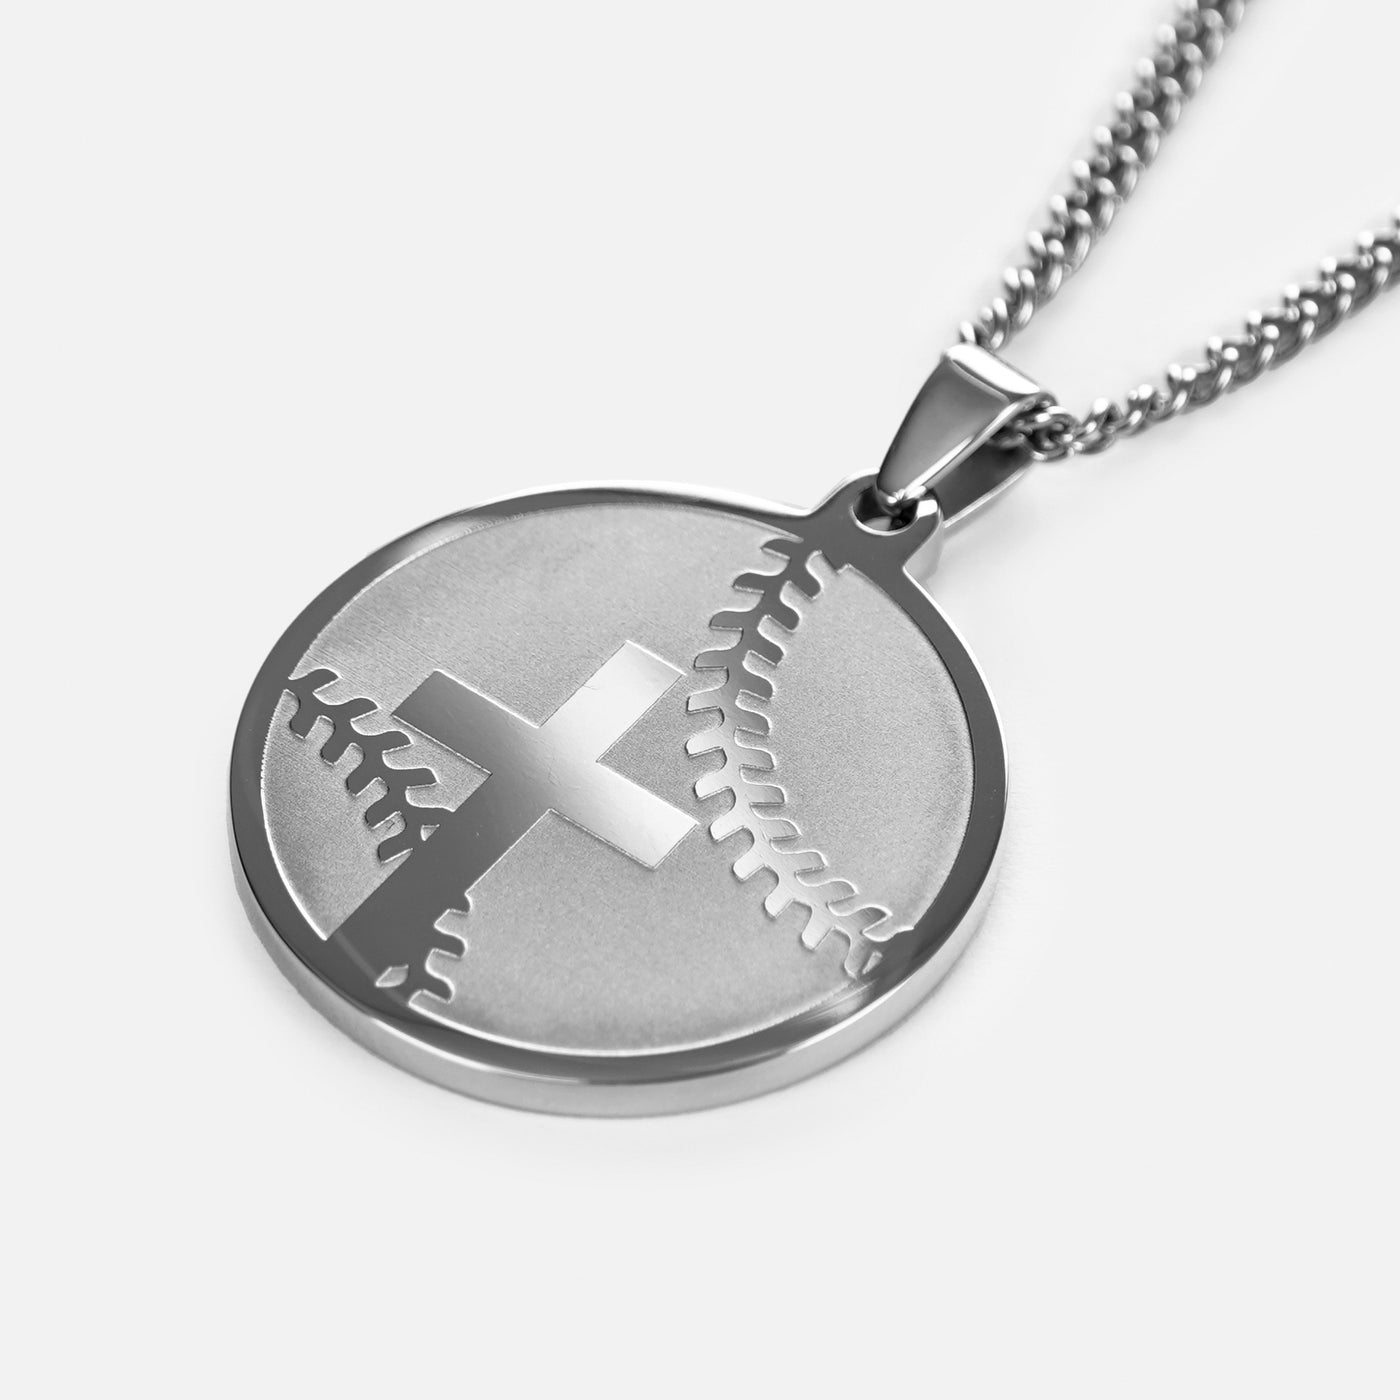 Baseball Faith Cross Pendant with Chain Necklace - Stainless Steel